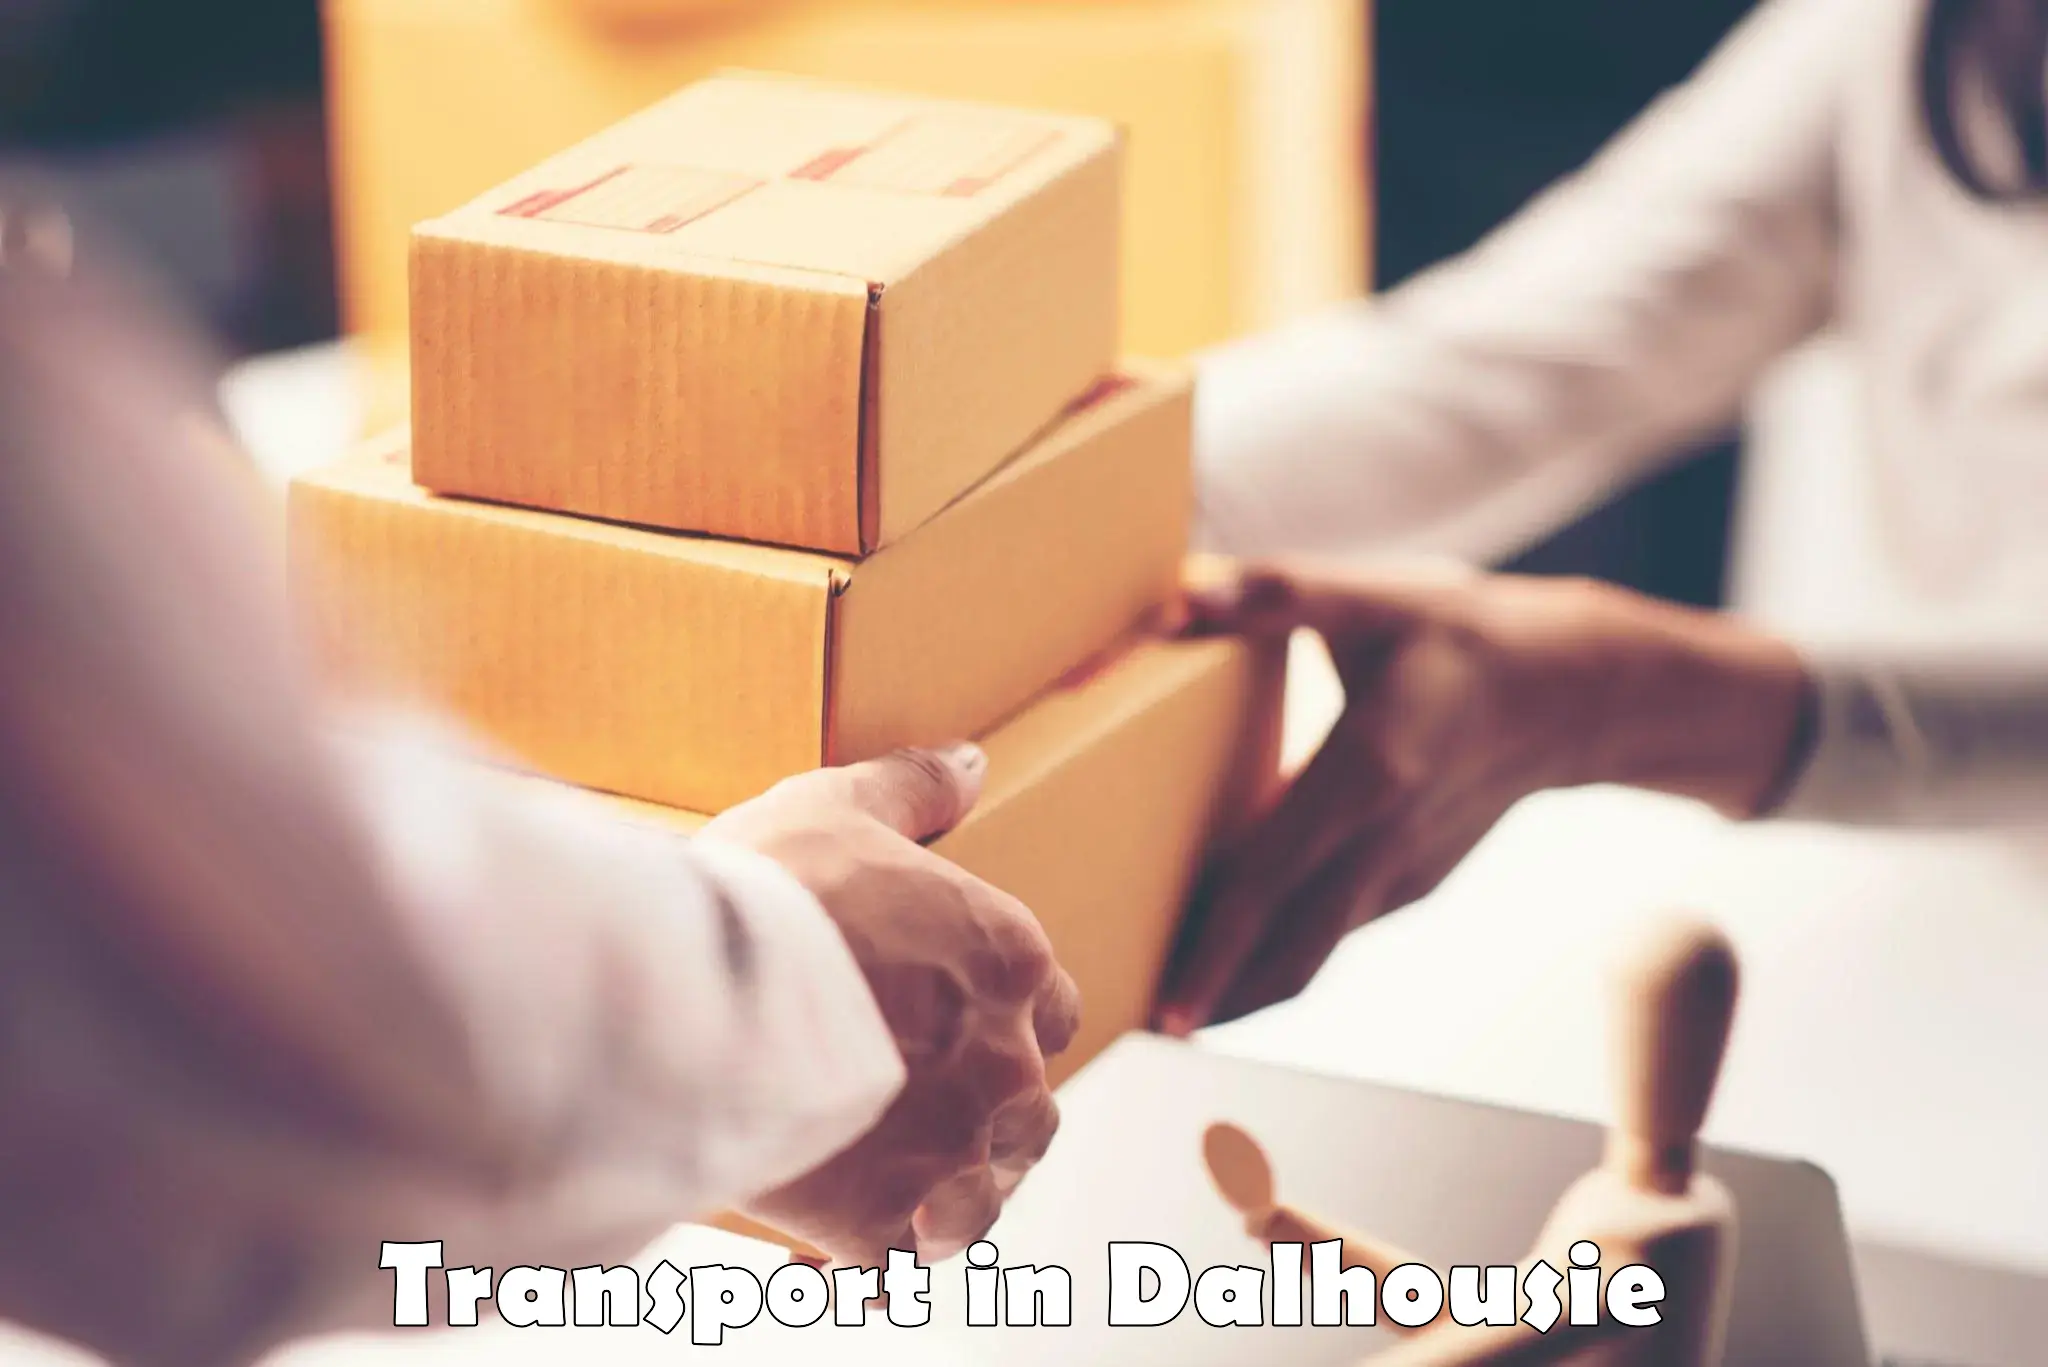 Luggage transport services in Dalhousie